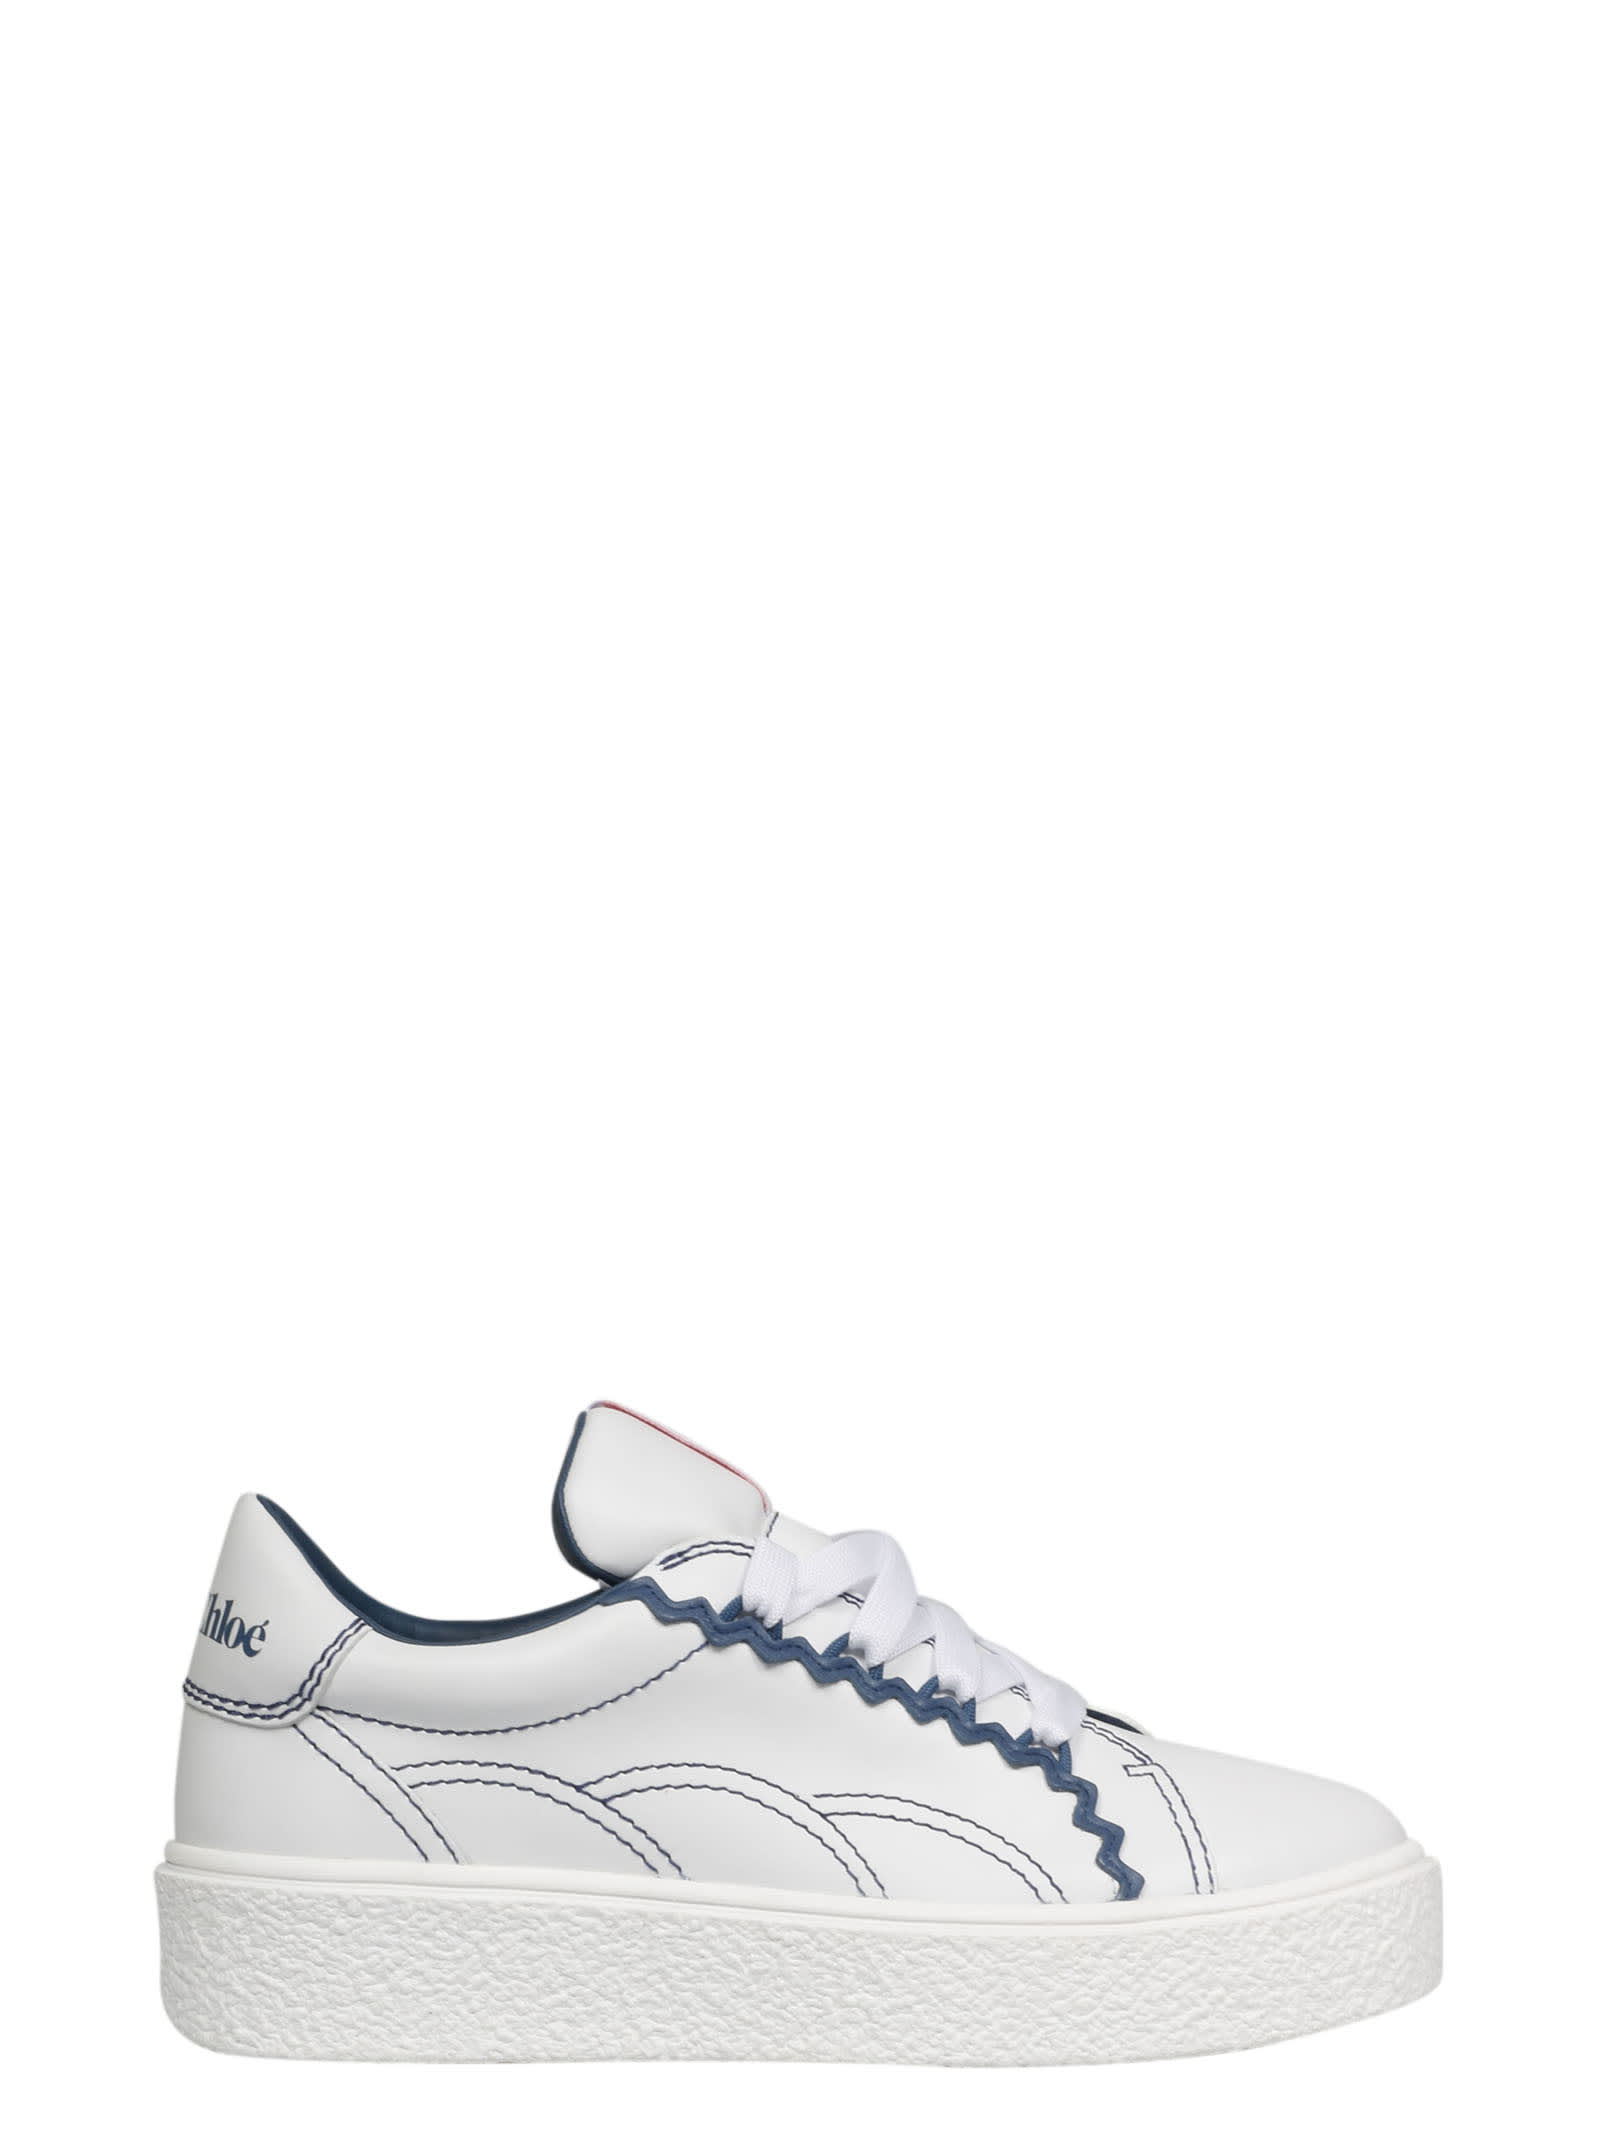 SEE BY CHLOÉ SEVY SNEAKERS,SB36001A 13002 101 WHITE 703 BLUE